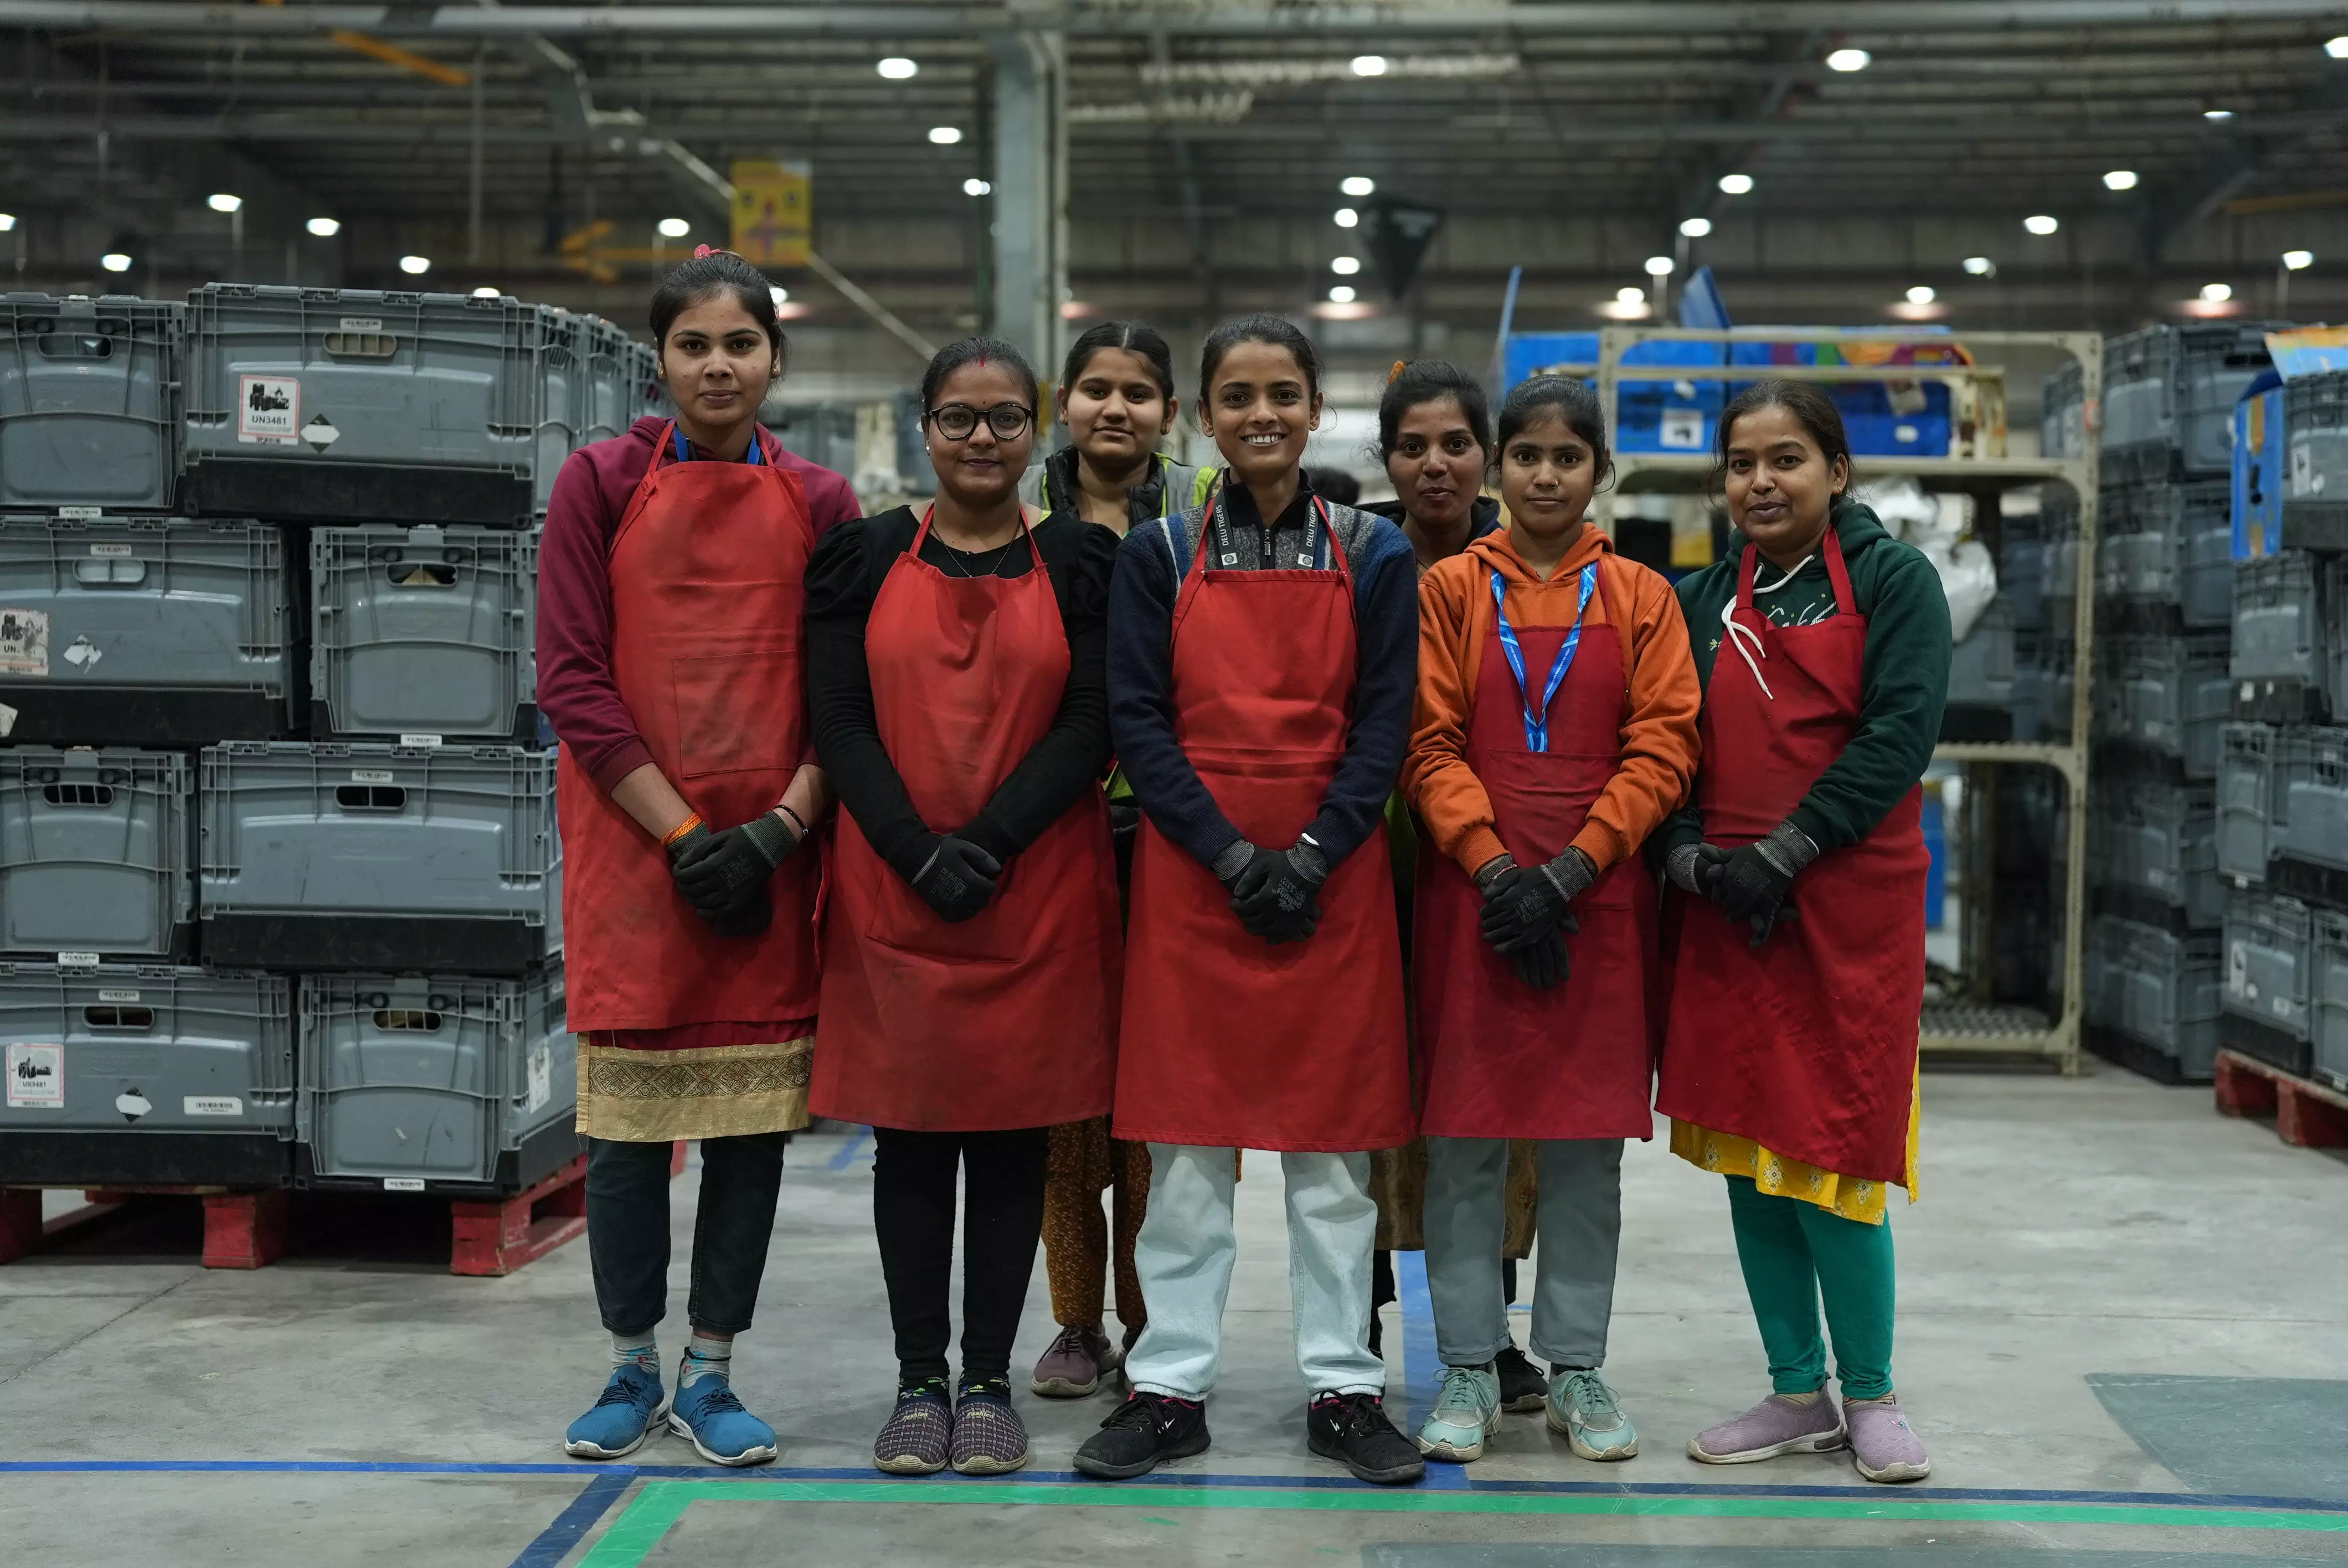 Amazon India offers opportunities for women to work in Night Shifts in Haryana